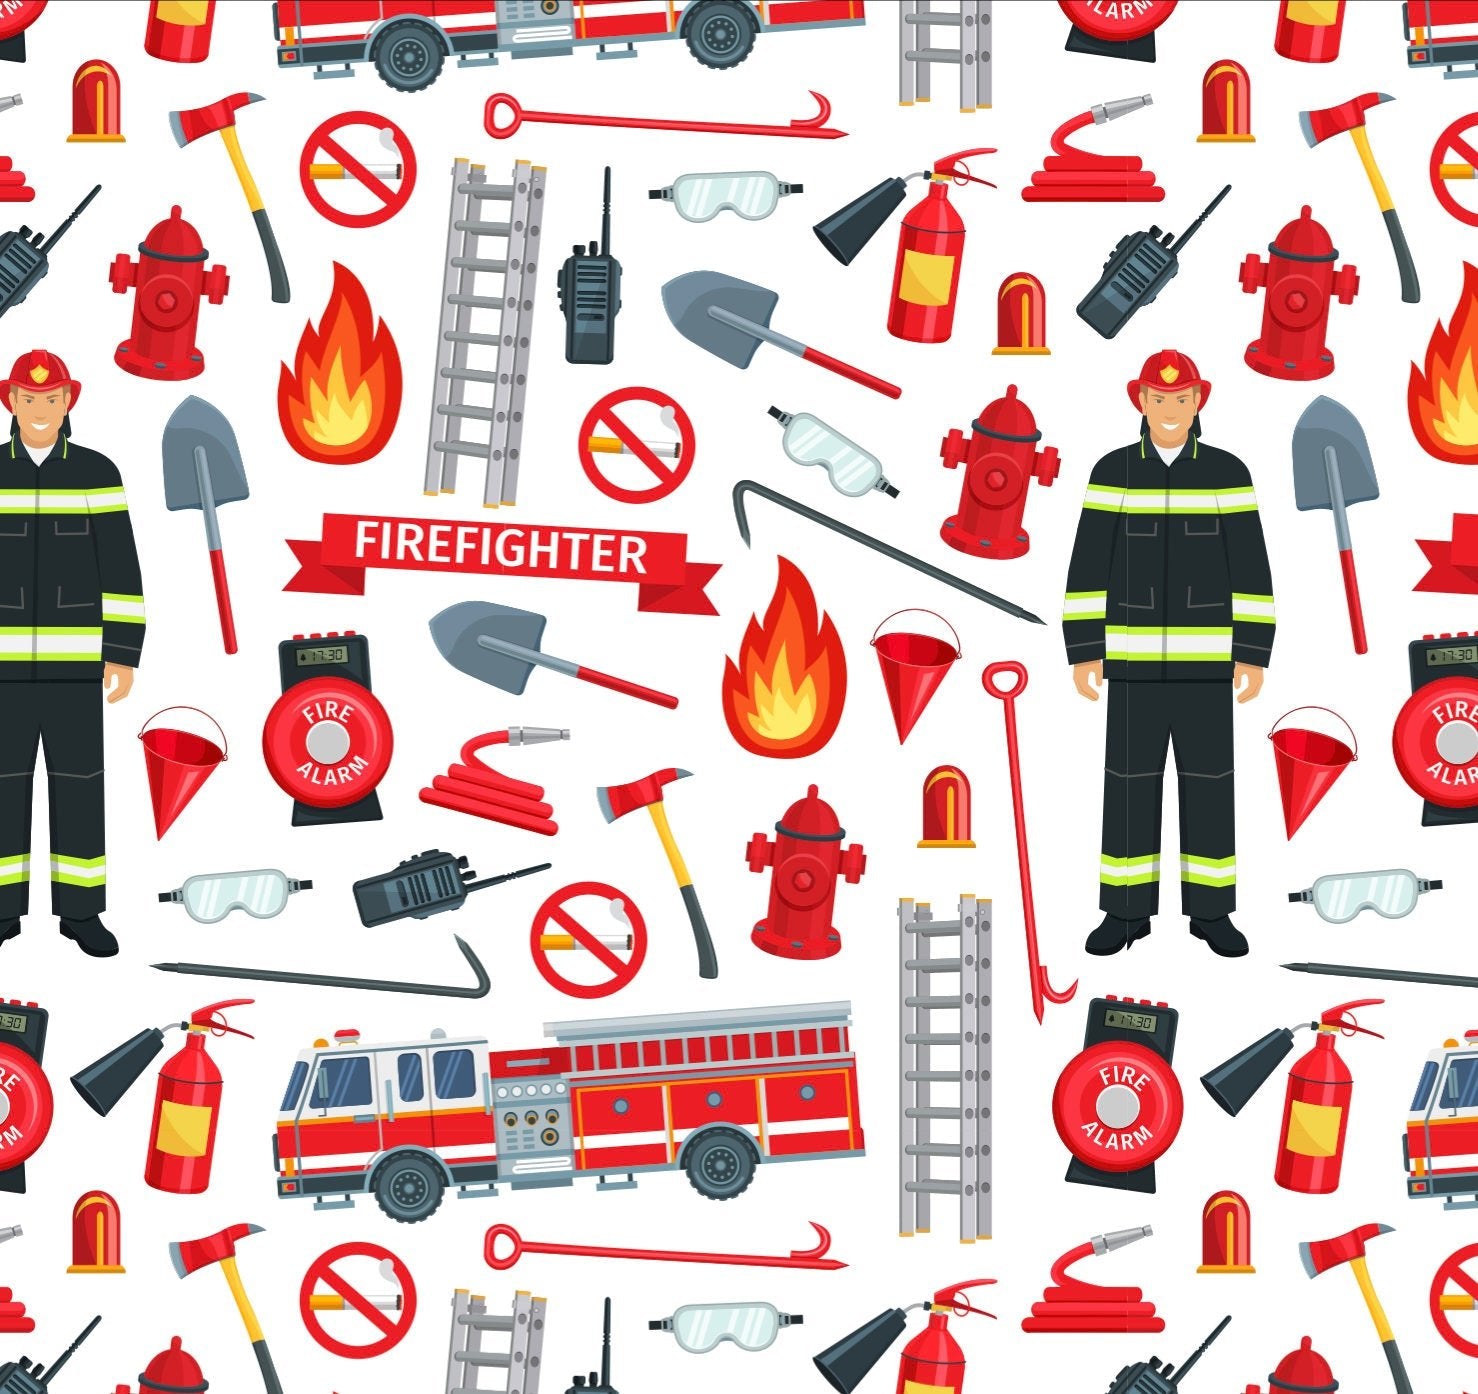 Firefighter Gift Wrap - Stesha Party